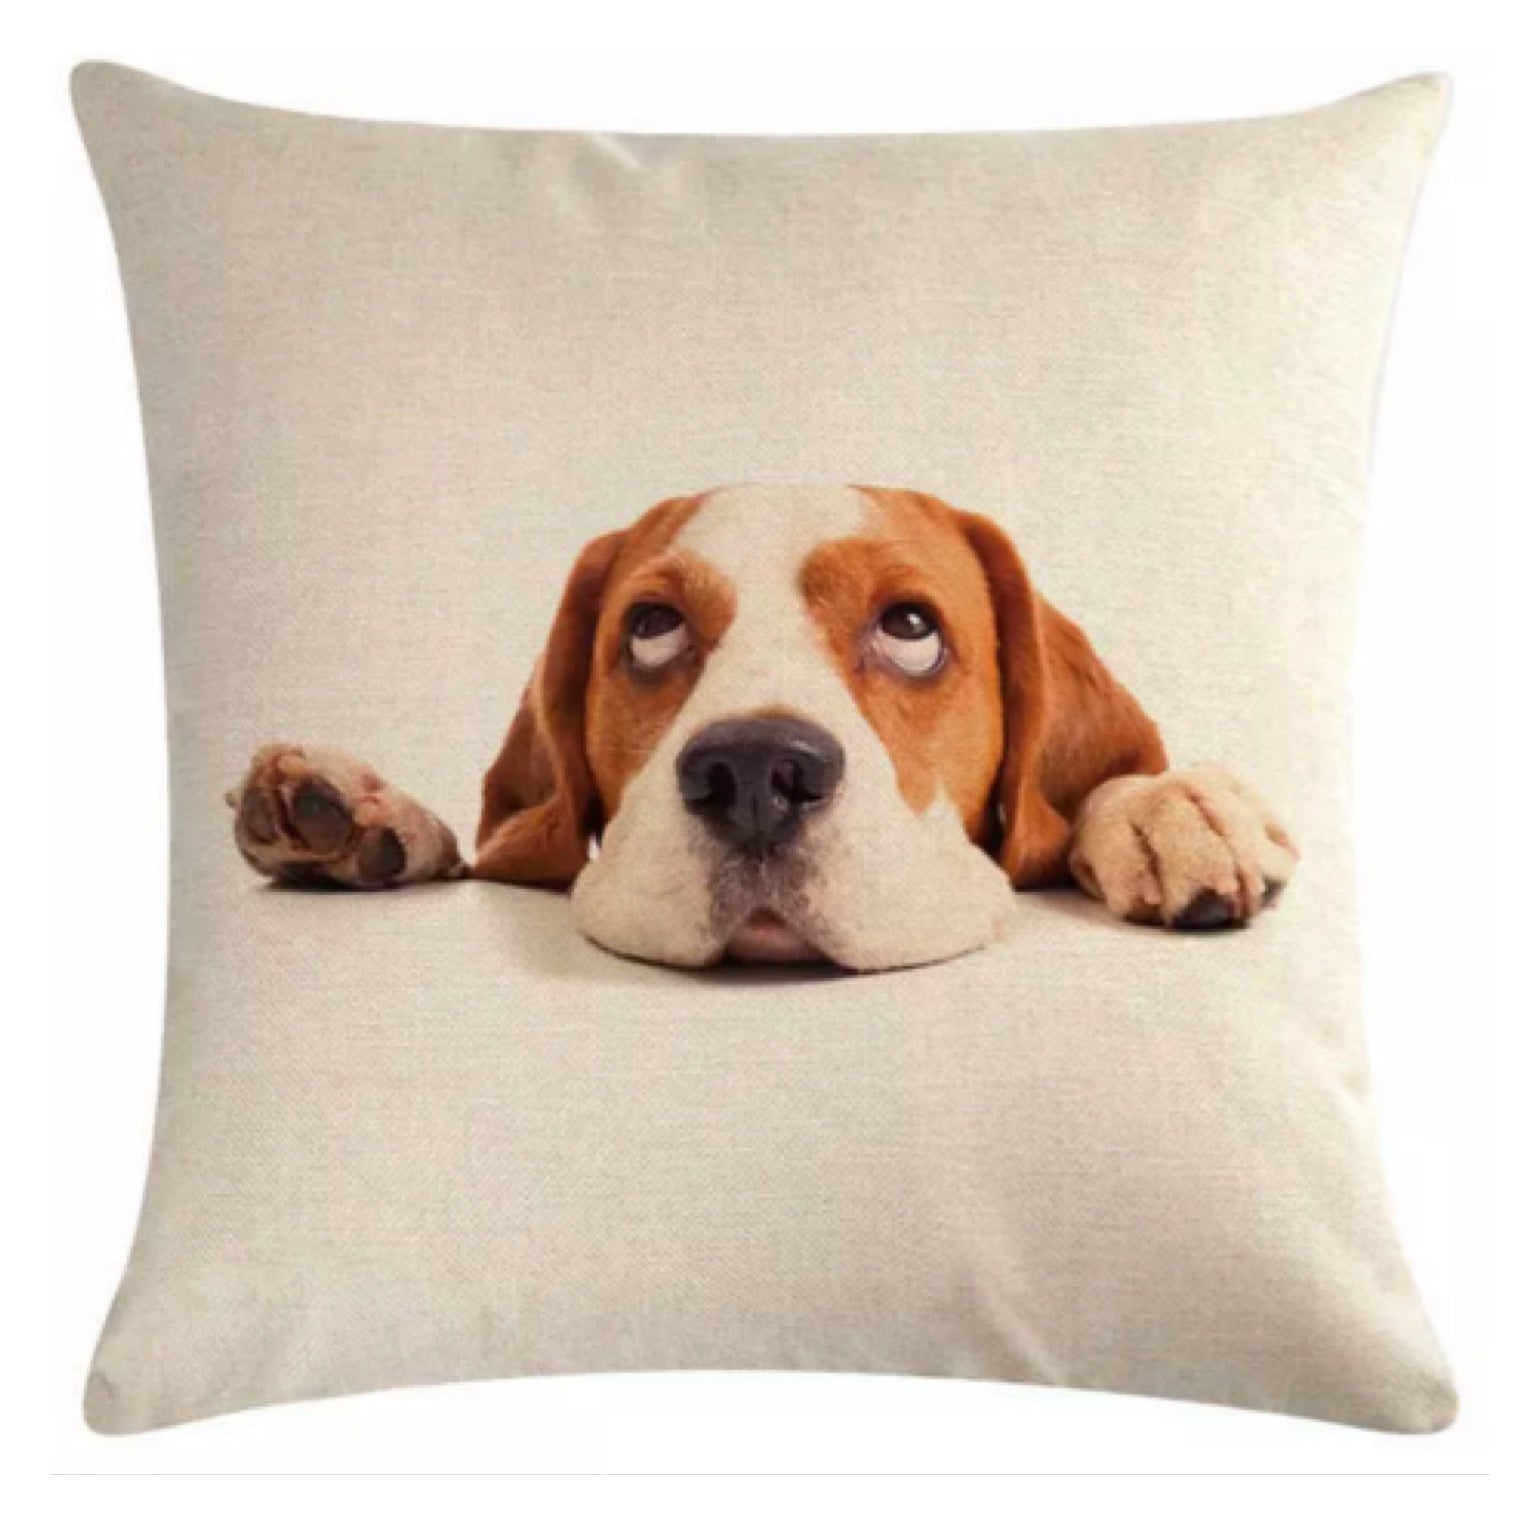 Cushion Cover Pillow Dog Brown Love - The Renmy Store Homewares & Gifts 